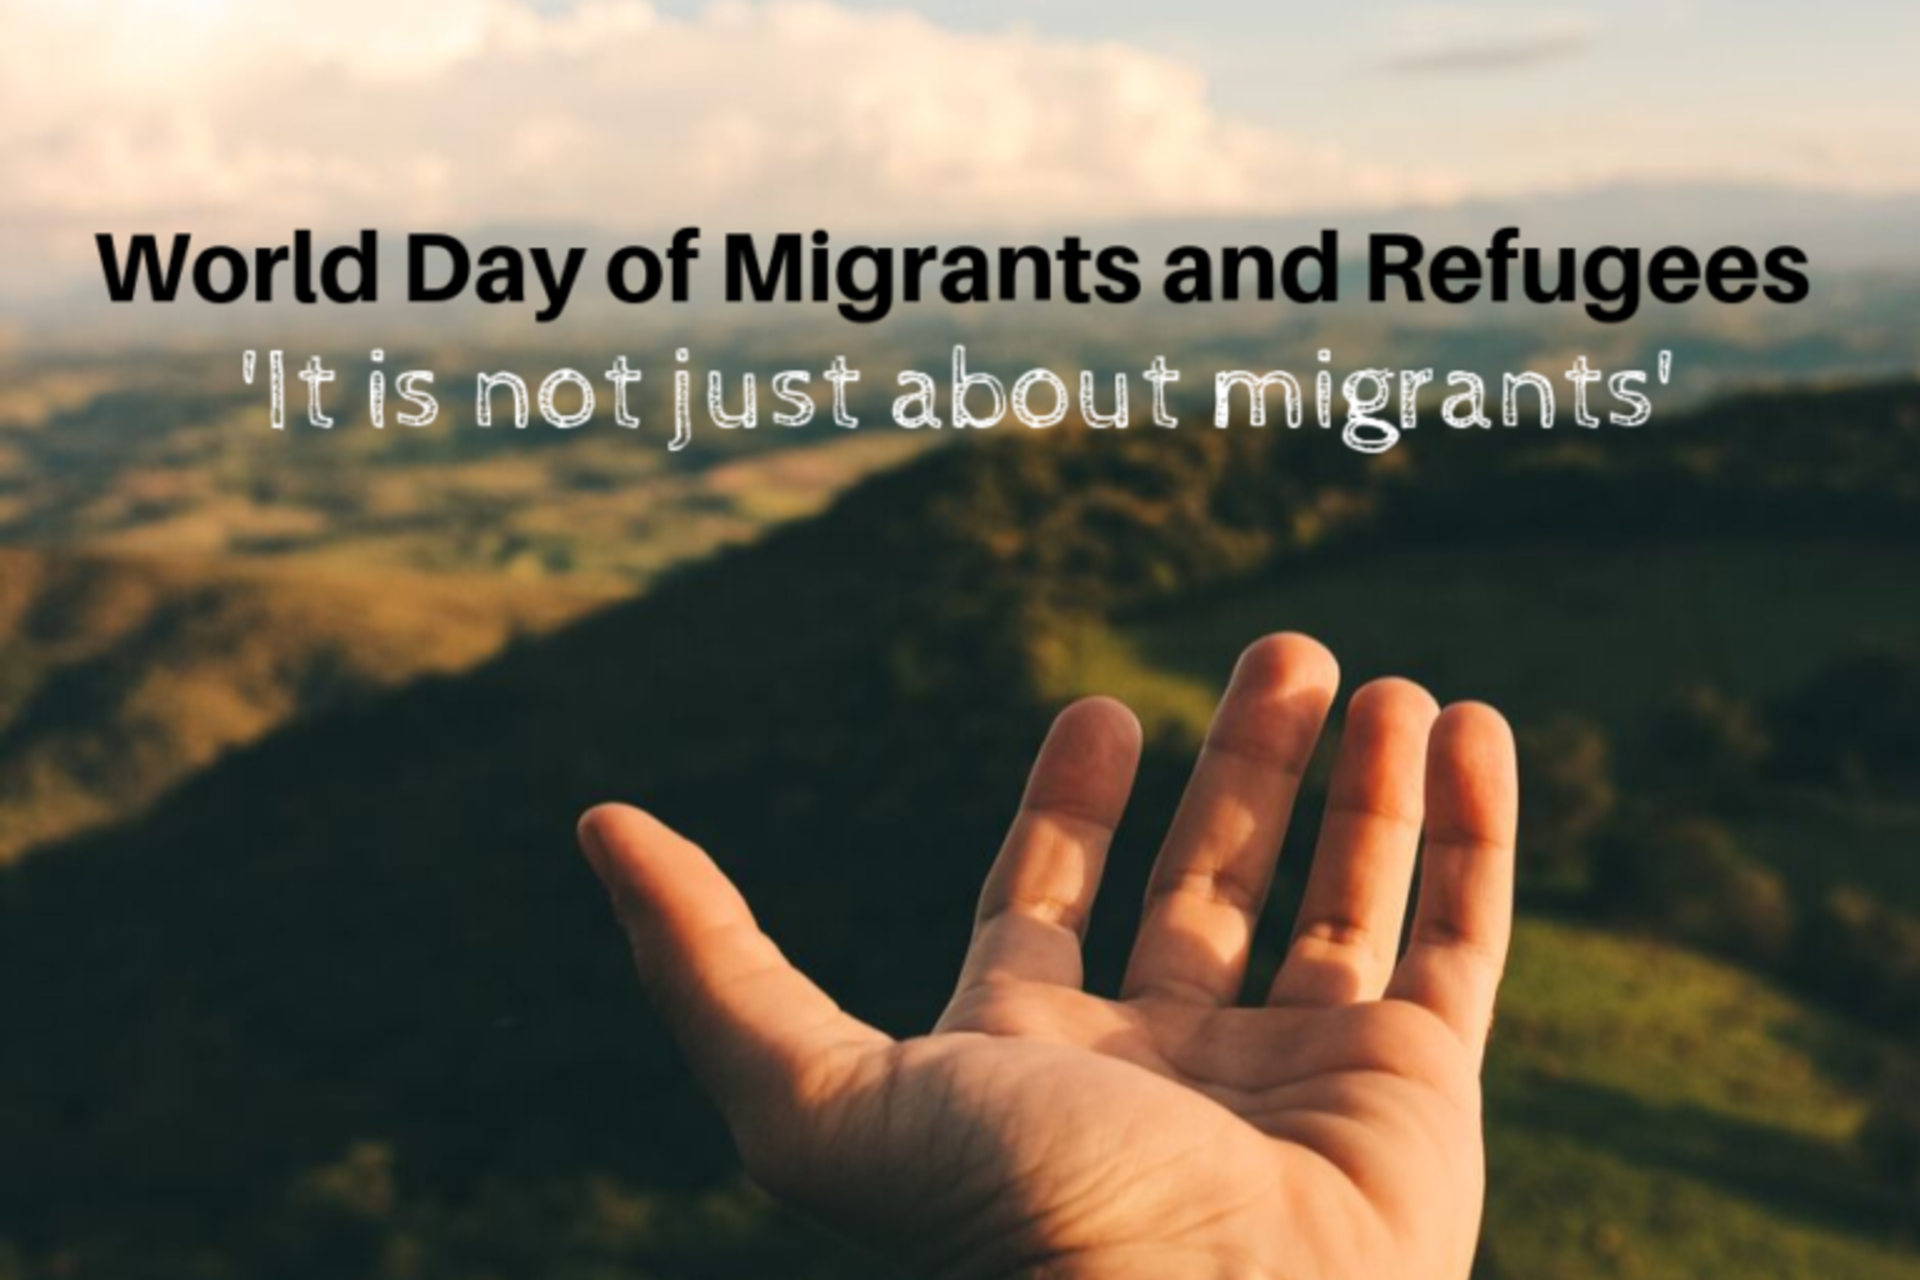 World Day of Migrants and Refugees, 29th September 2019